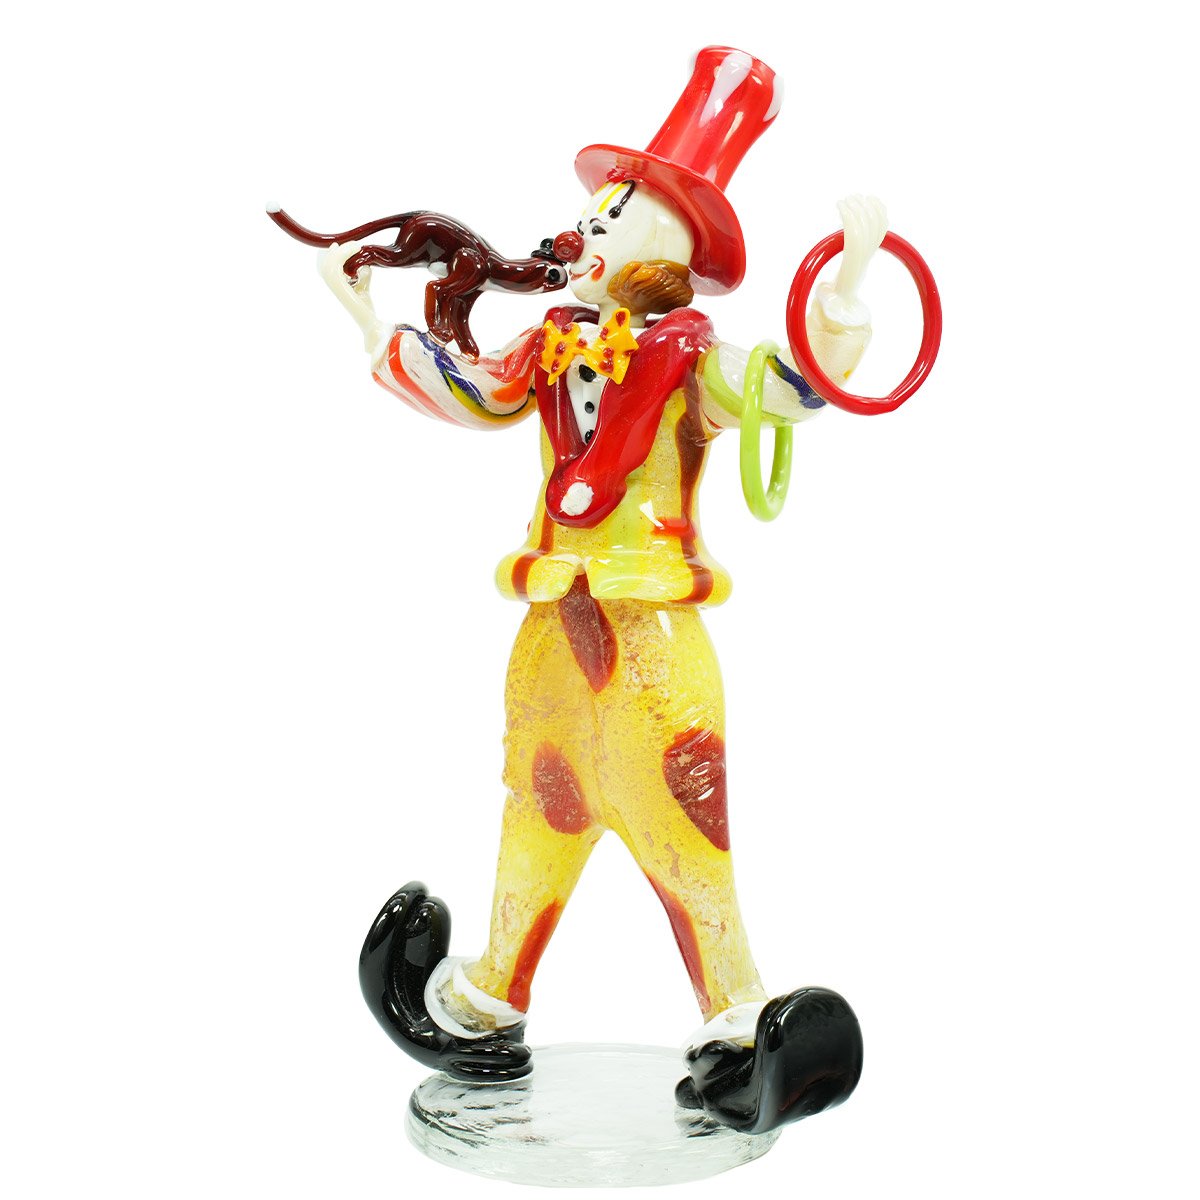 Sculptures & Figurines - Objects of Art glass - Various Collections: Clown  figurine - Big size - Original Murano Glass OMG